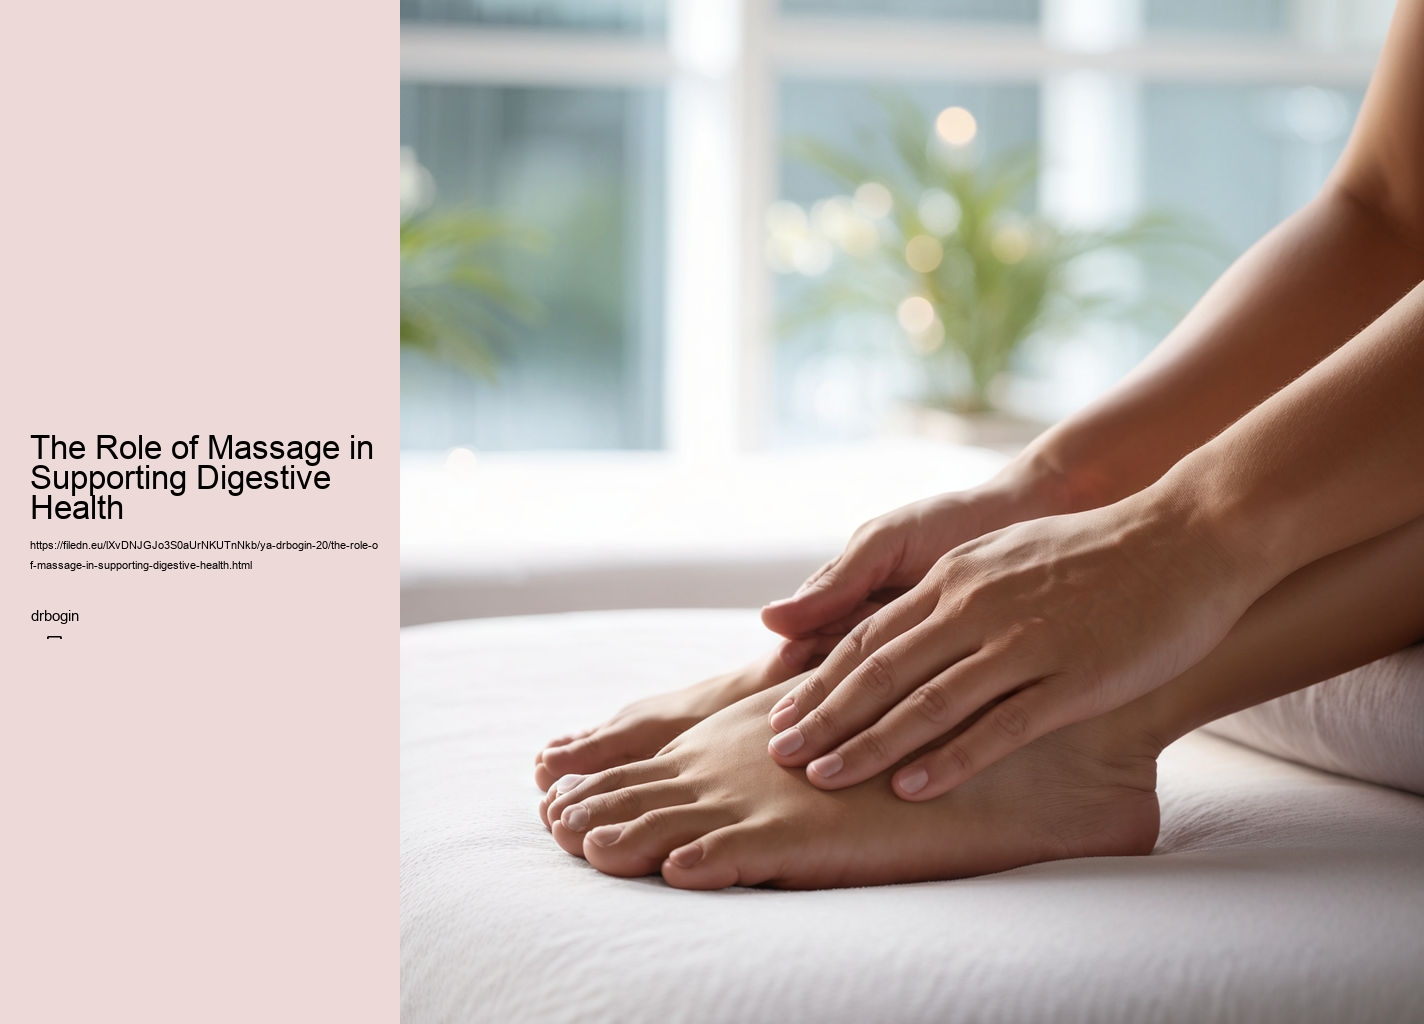 The Role of Massage in Supporting Digestive Health